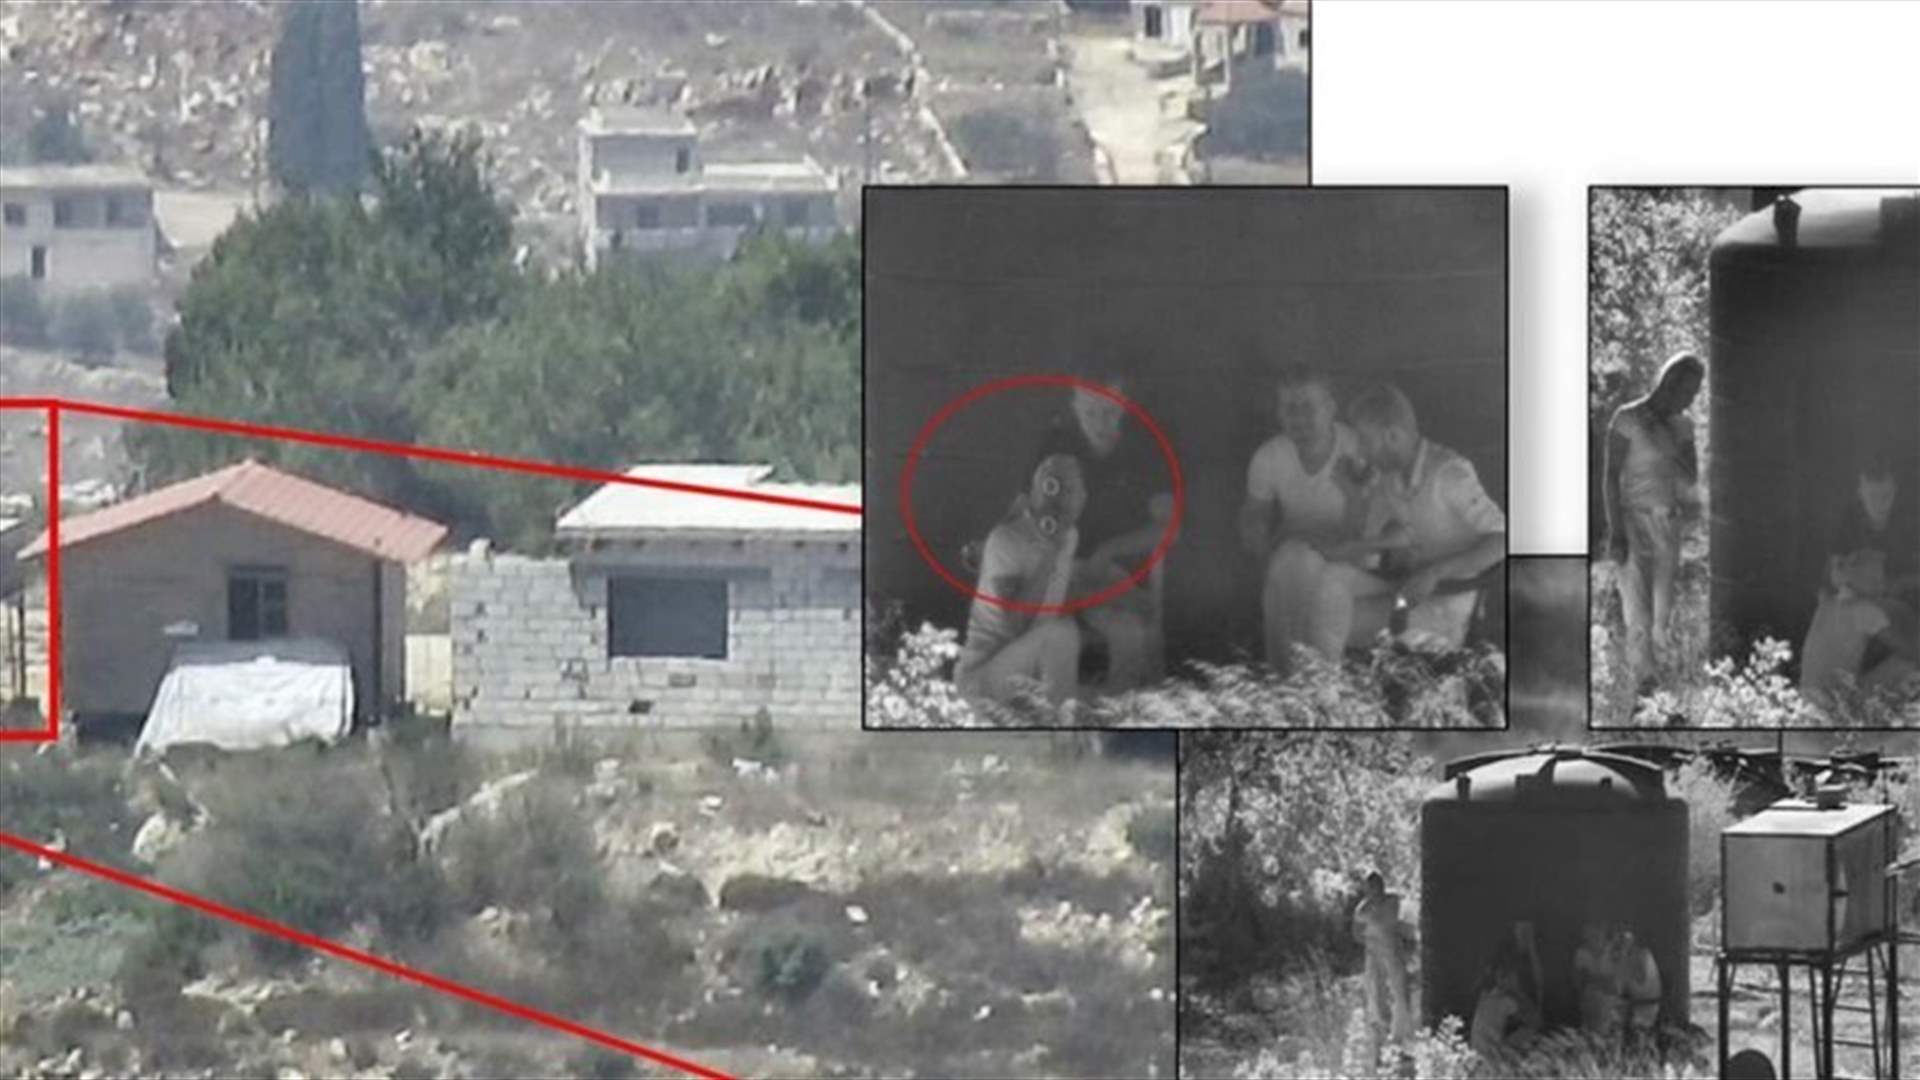 Israel accuses Hezbollah of spying under cover of NGO-[PHOTO]